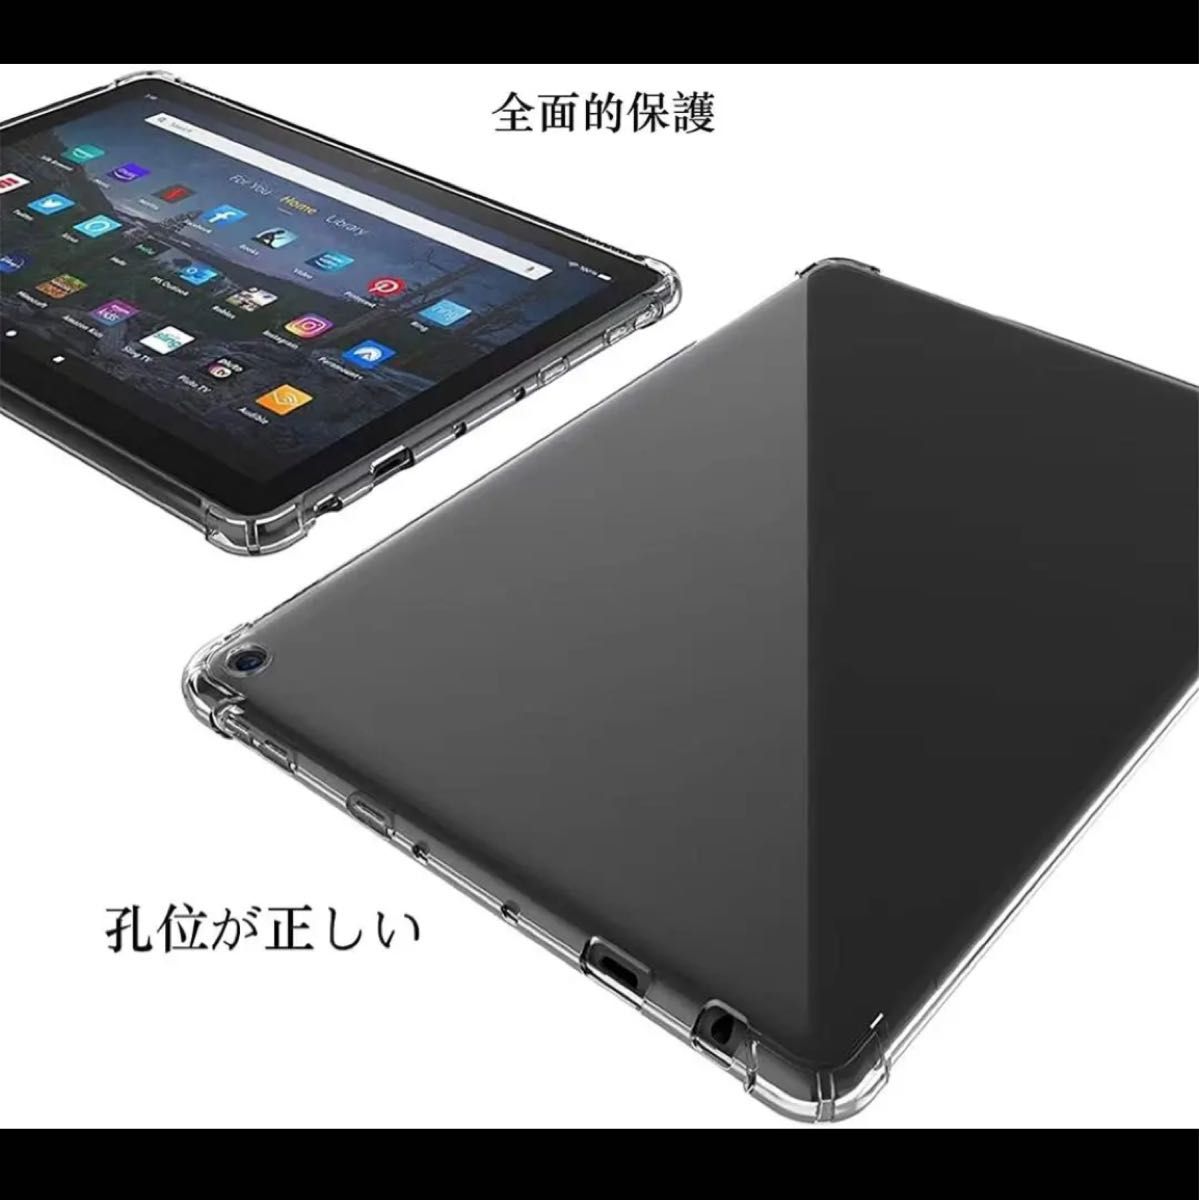 For NEW Fire 7 ケース 7インチ カバー 落下衝撃　タブレットケース